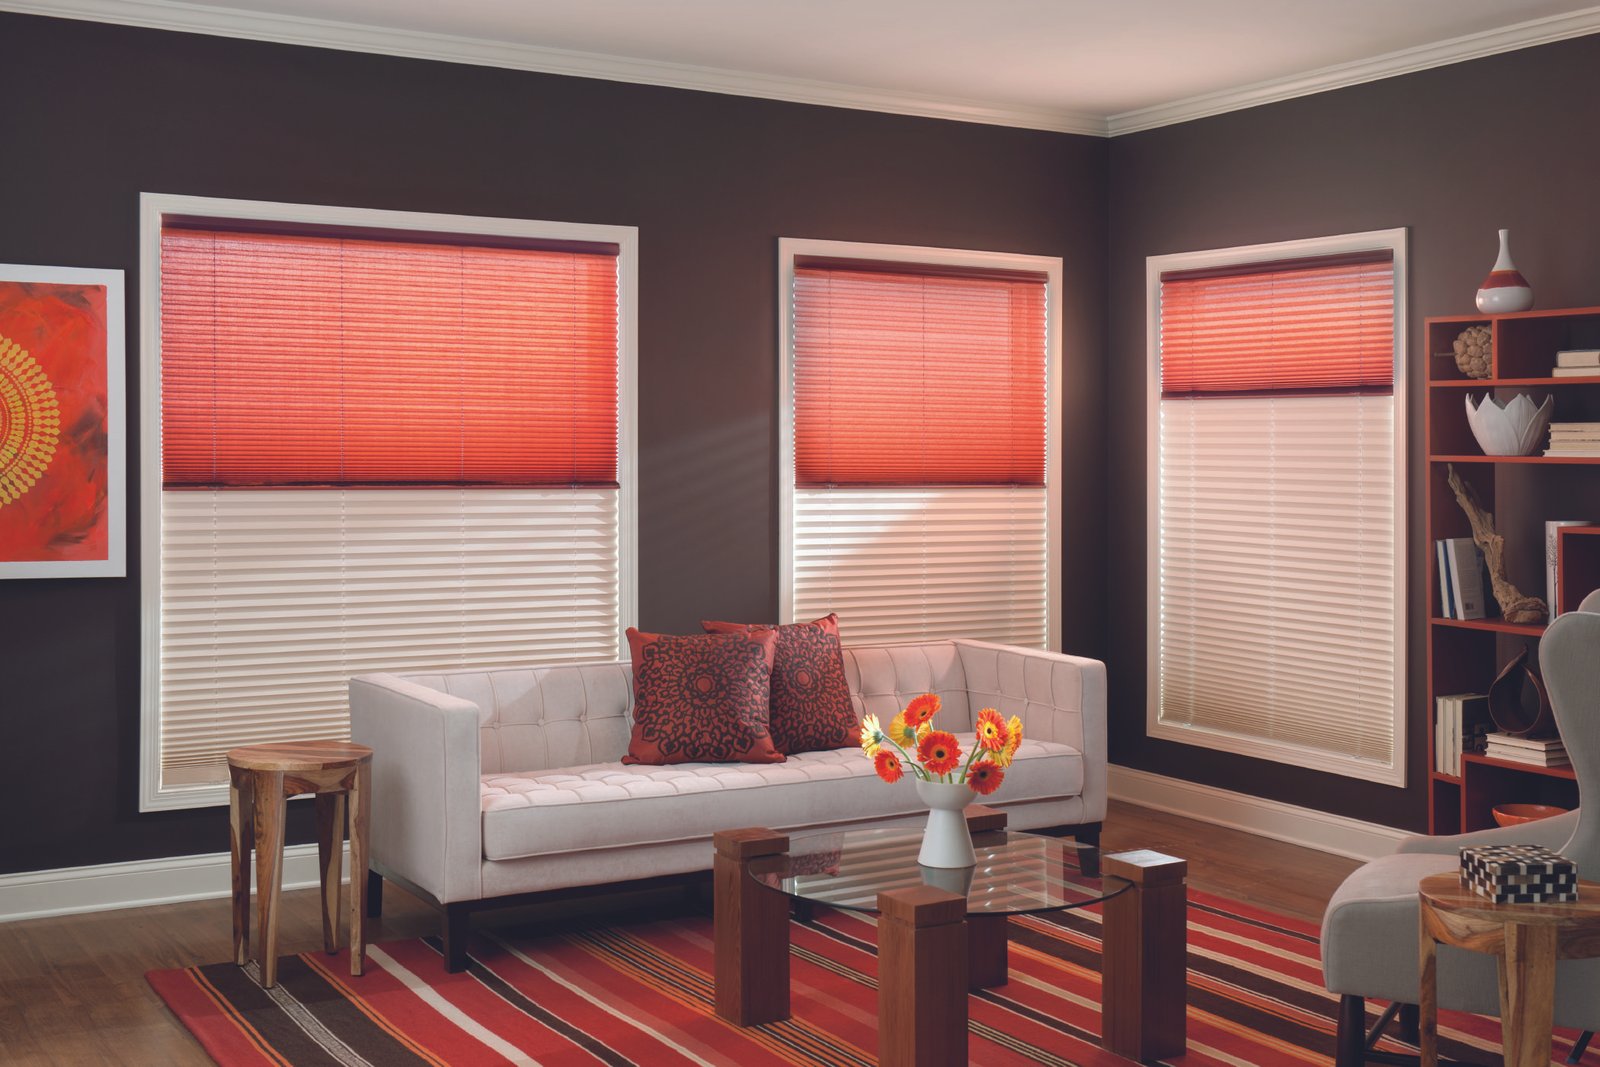 Roman and Roller shades